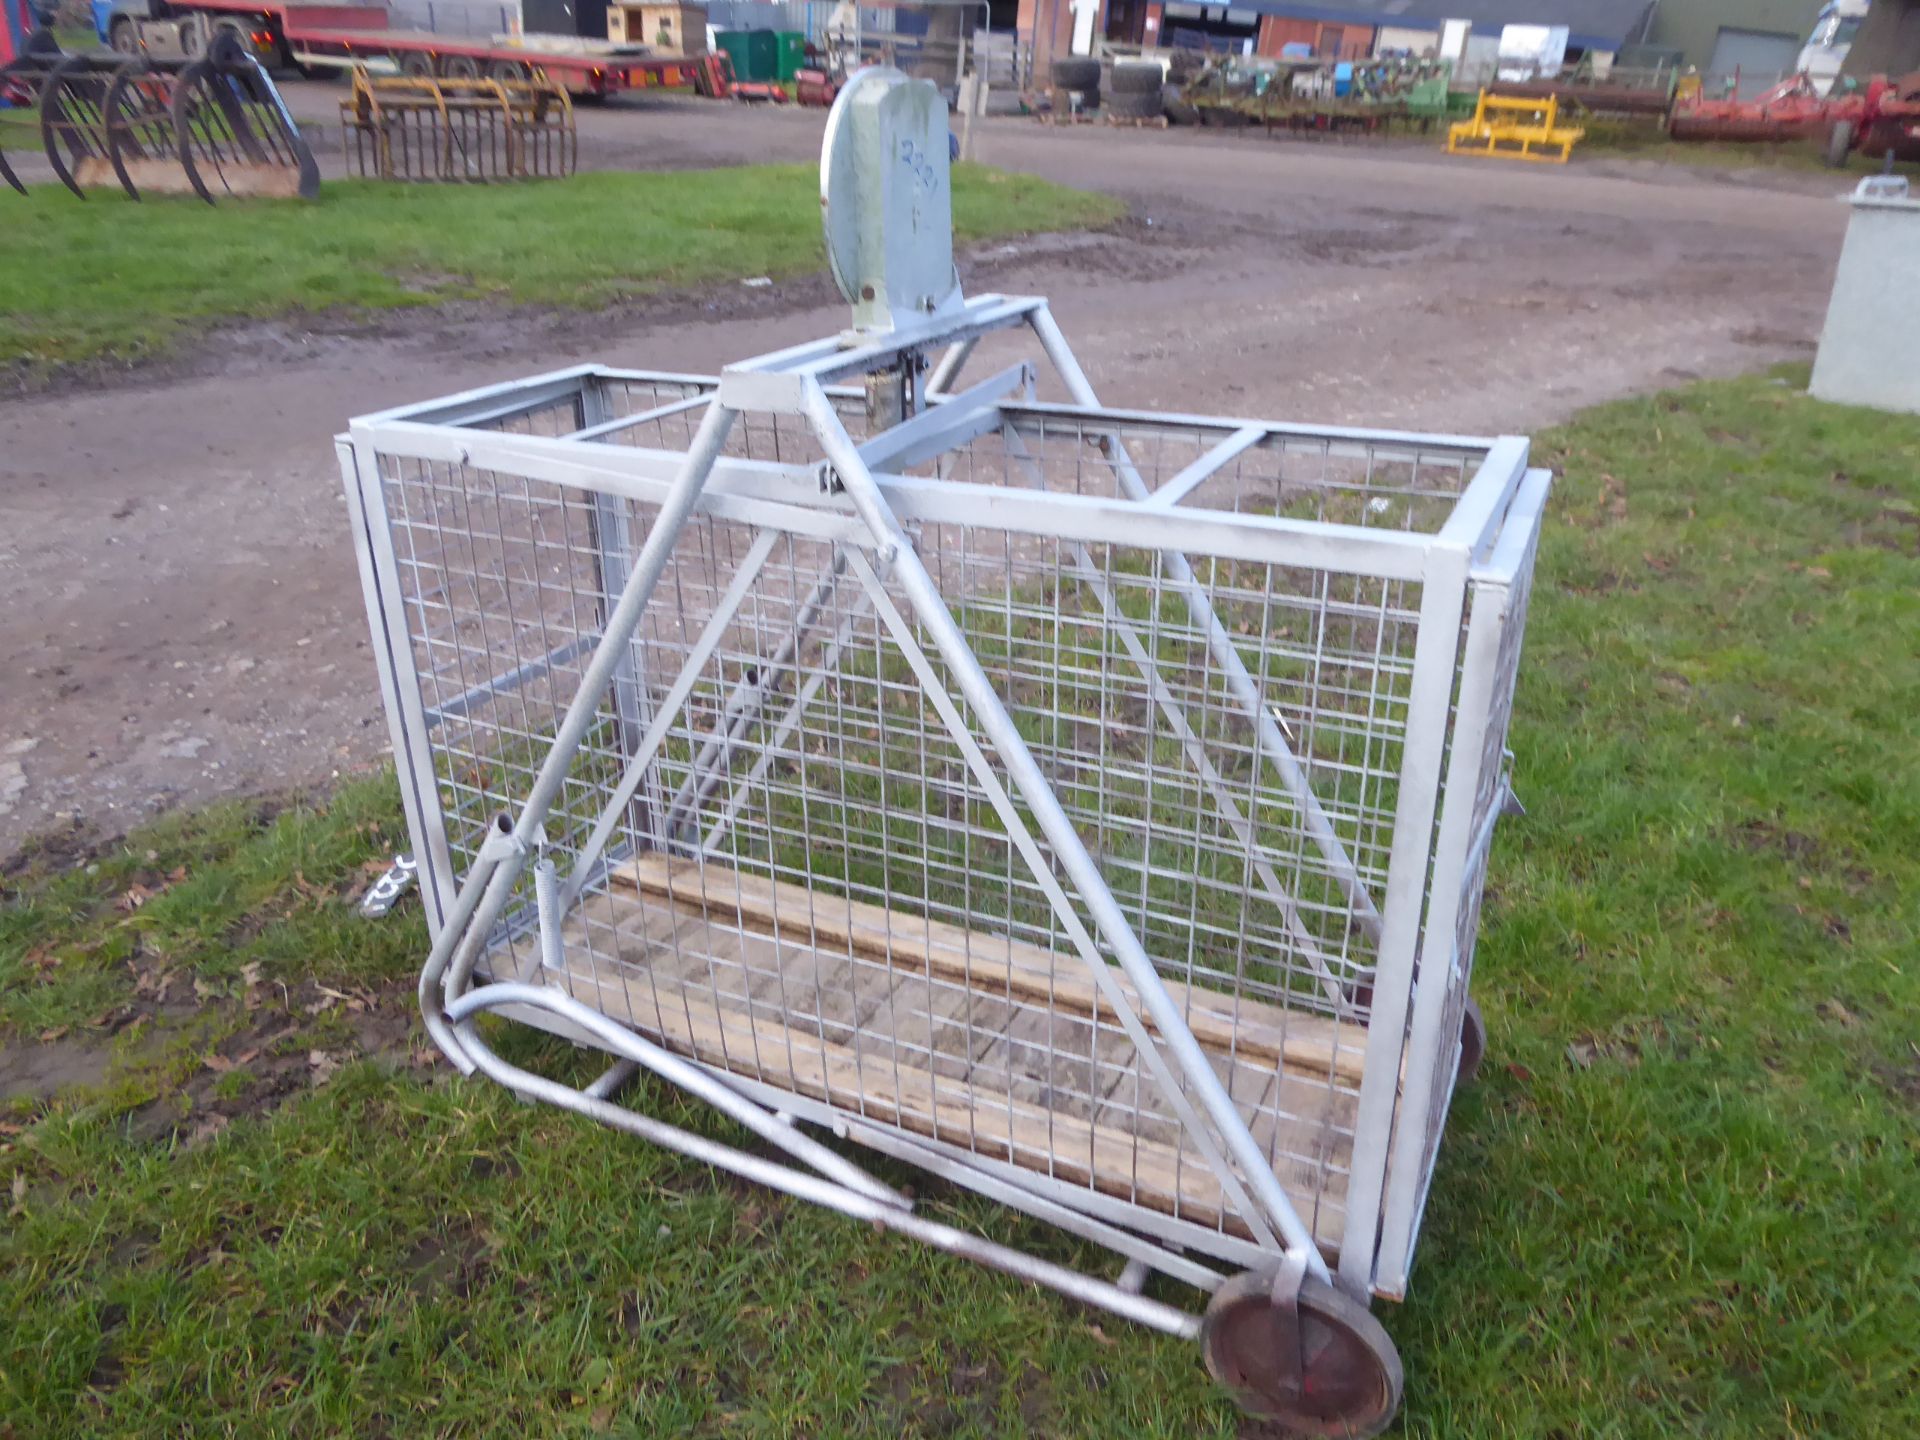 Sheep weigh crate on wheels - Image 2 of 2